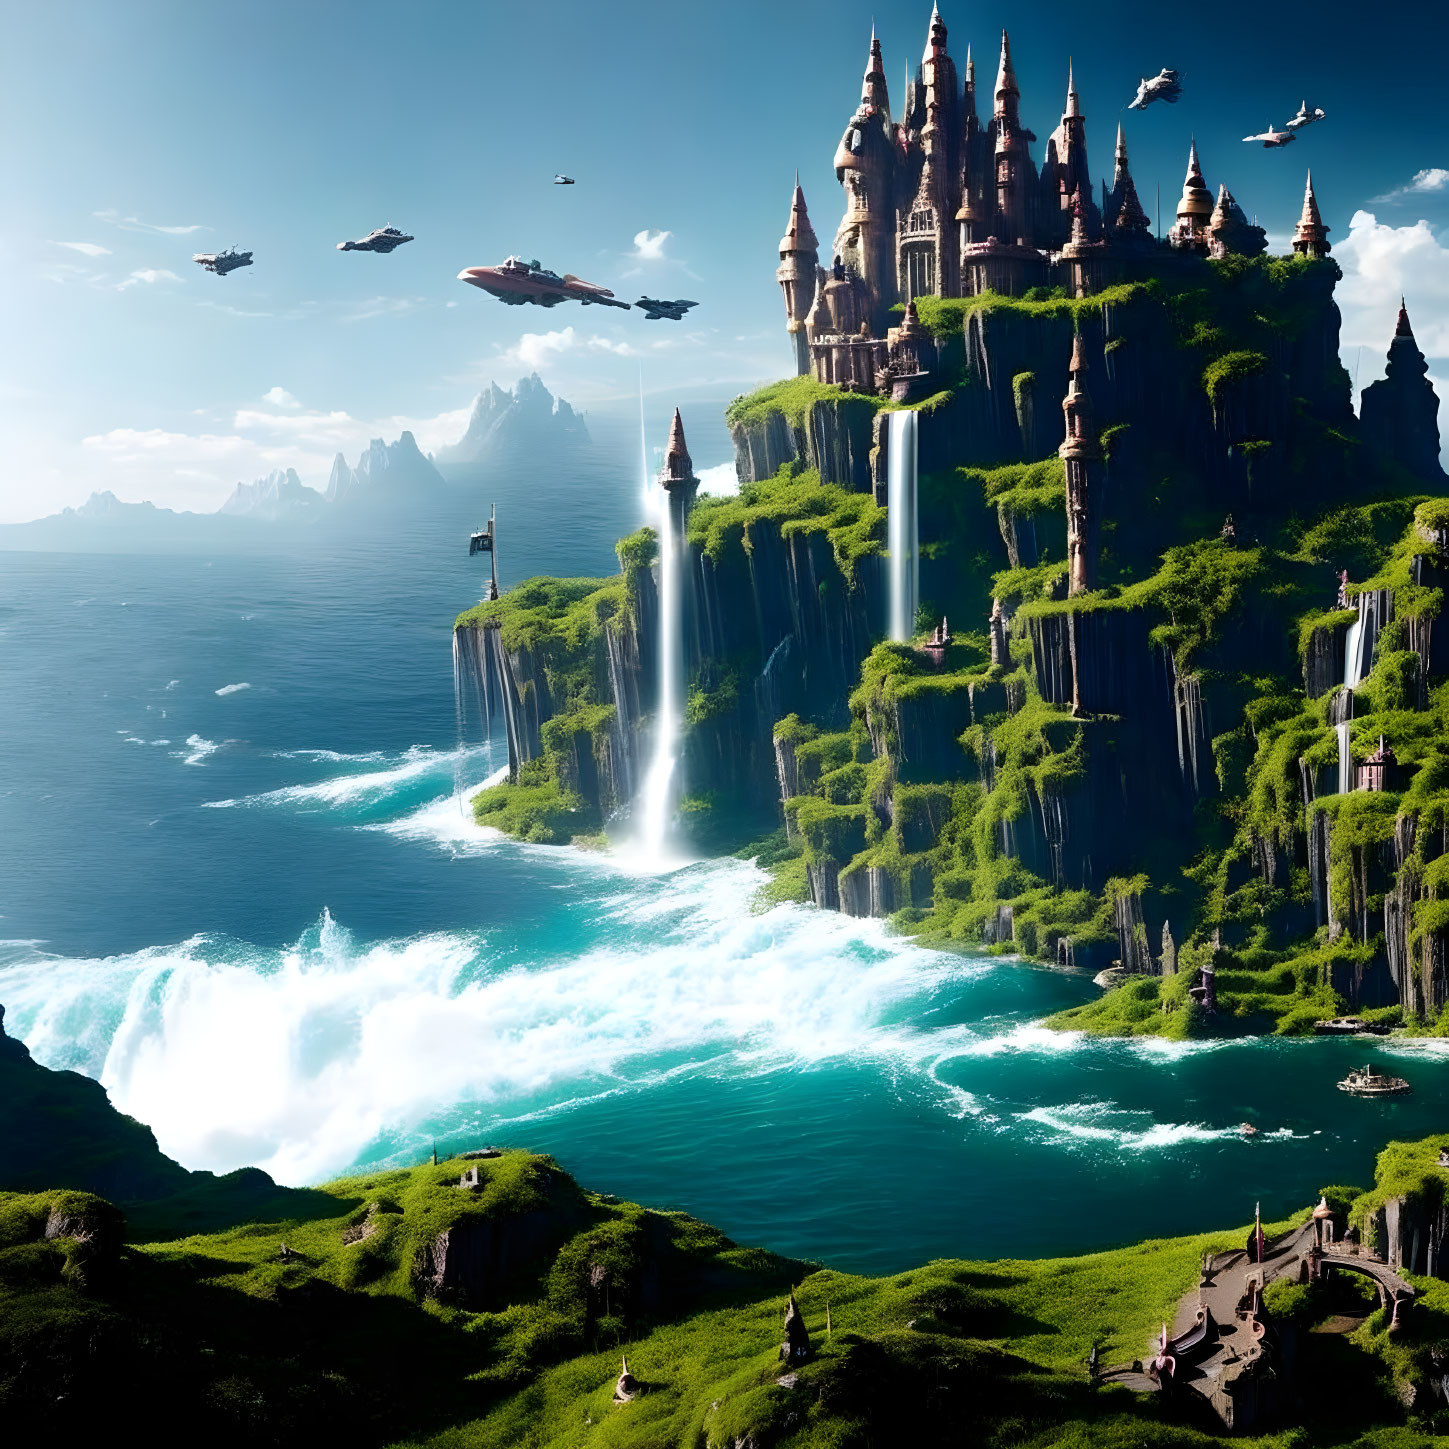 Majestic fantasy castle on steep cliffs with waterfalls and flying ships